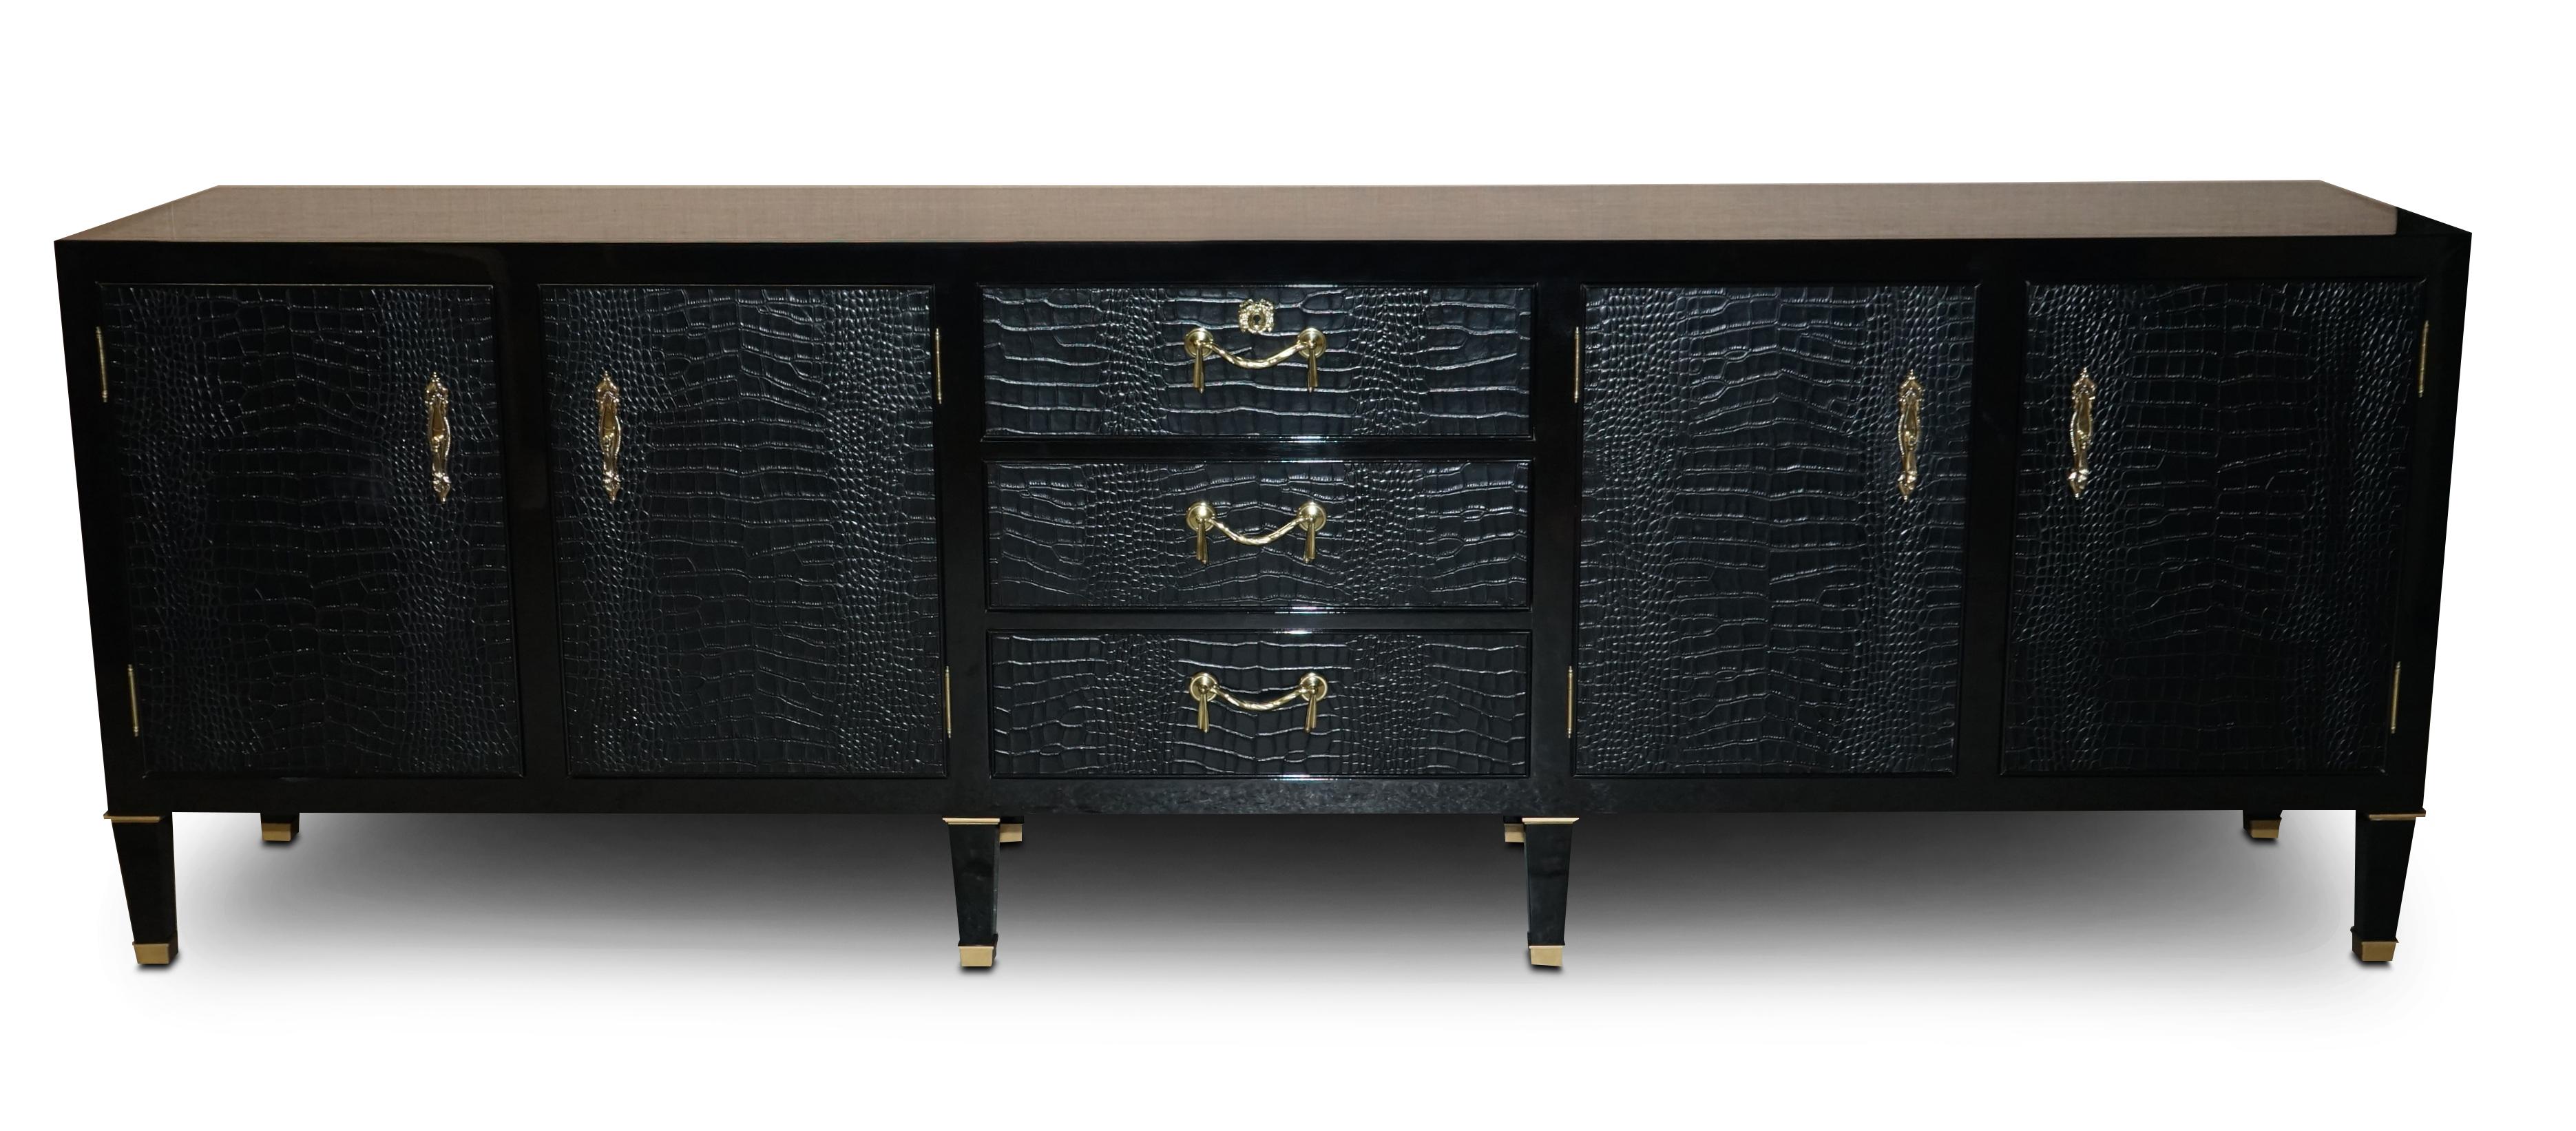 We are delighted to offer for sale this exquisite RRP £27,895 Ralph Lauren Brook Street Alligator / Crocodile patina leather sideboard with drawers.

I have around 40 pieces of new Ralph Lauren furniture now in stock, most of which is from the